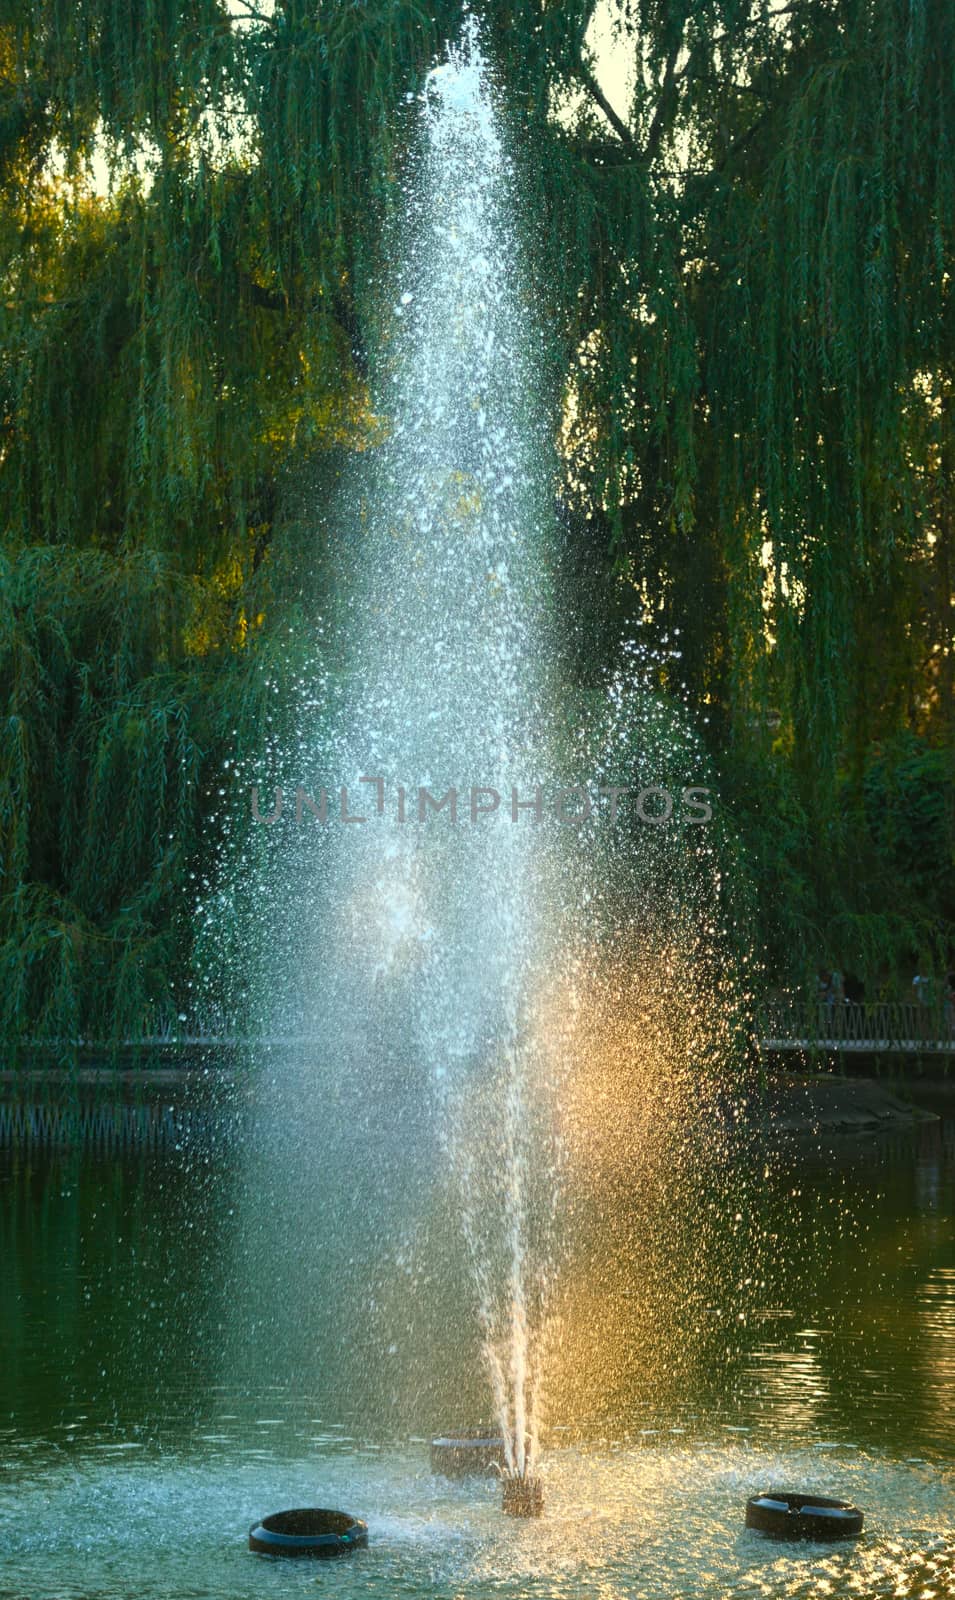 Jet of water from fountain in lake with tree in background by sheriffkule